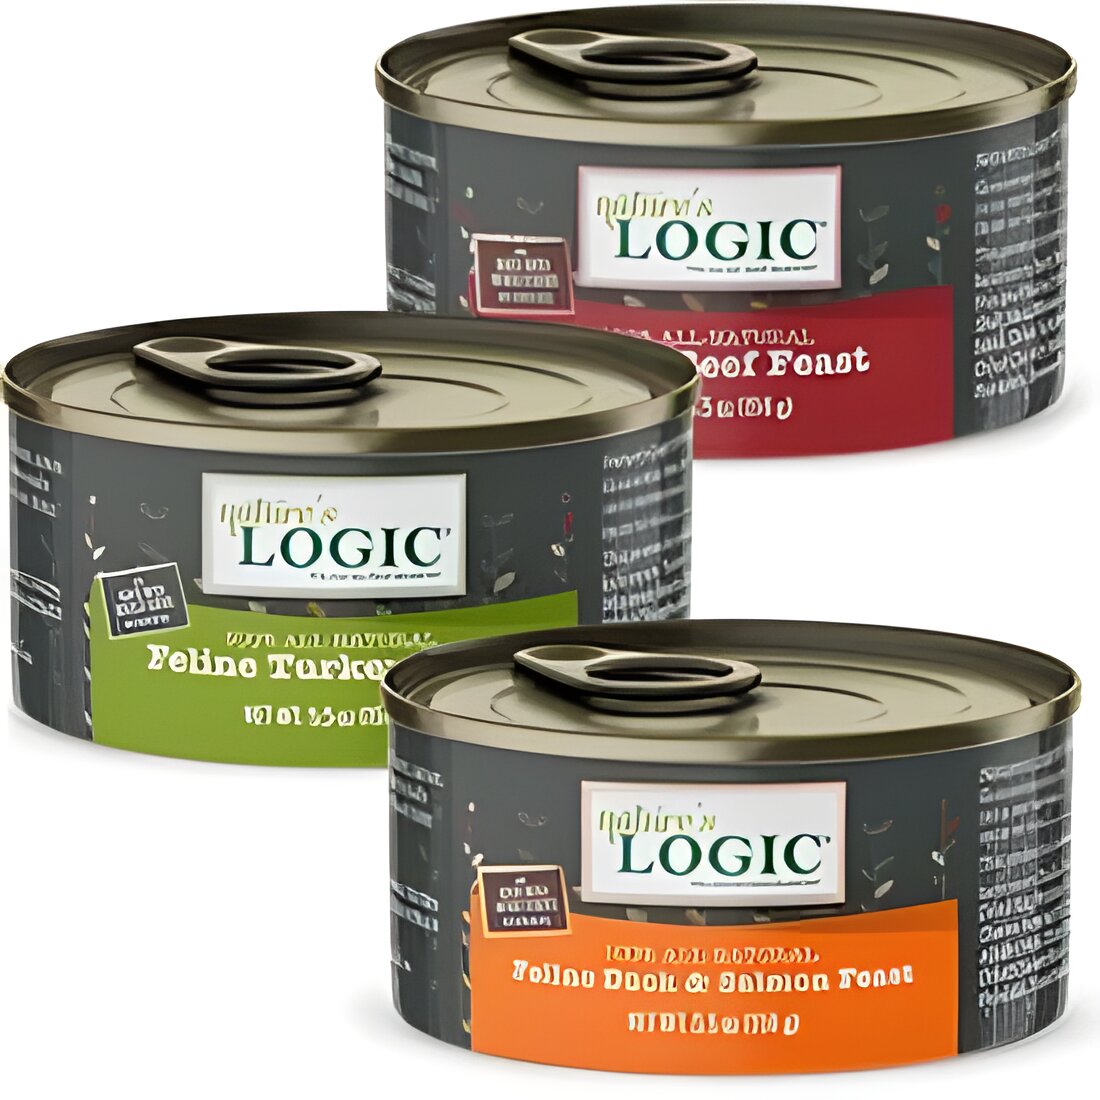 Free Cans of Nature's Logic Cat Food